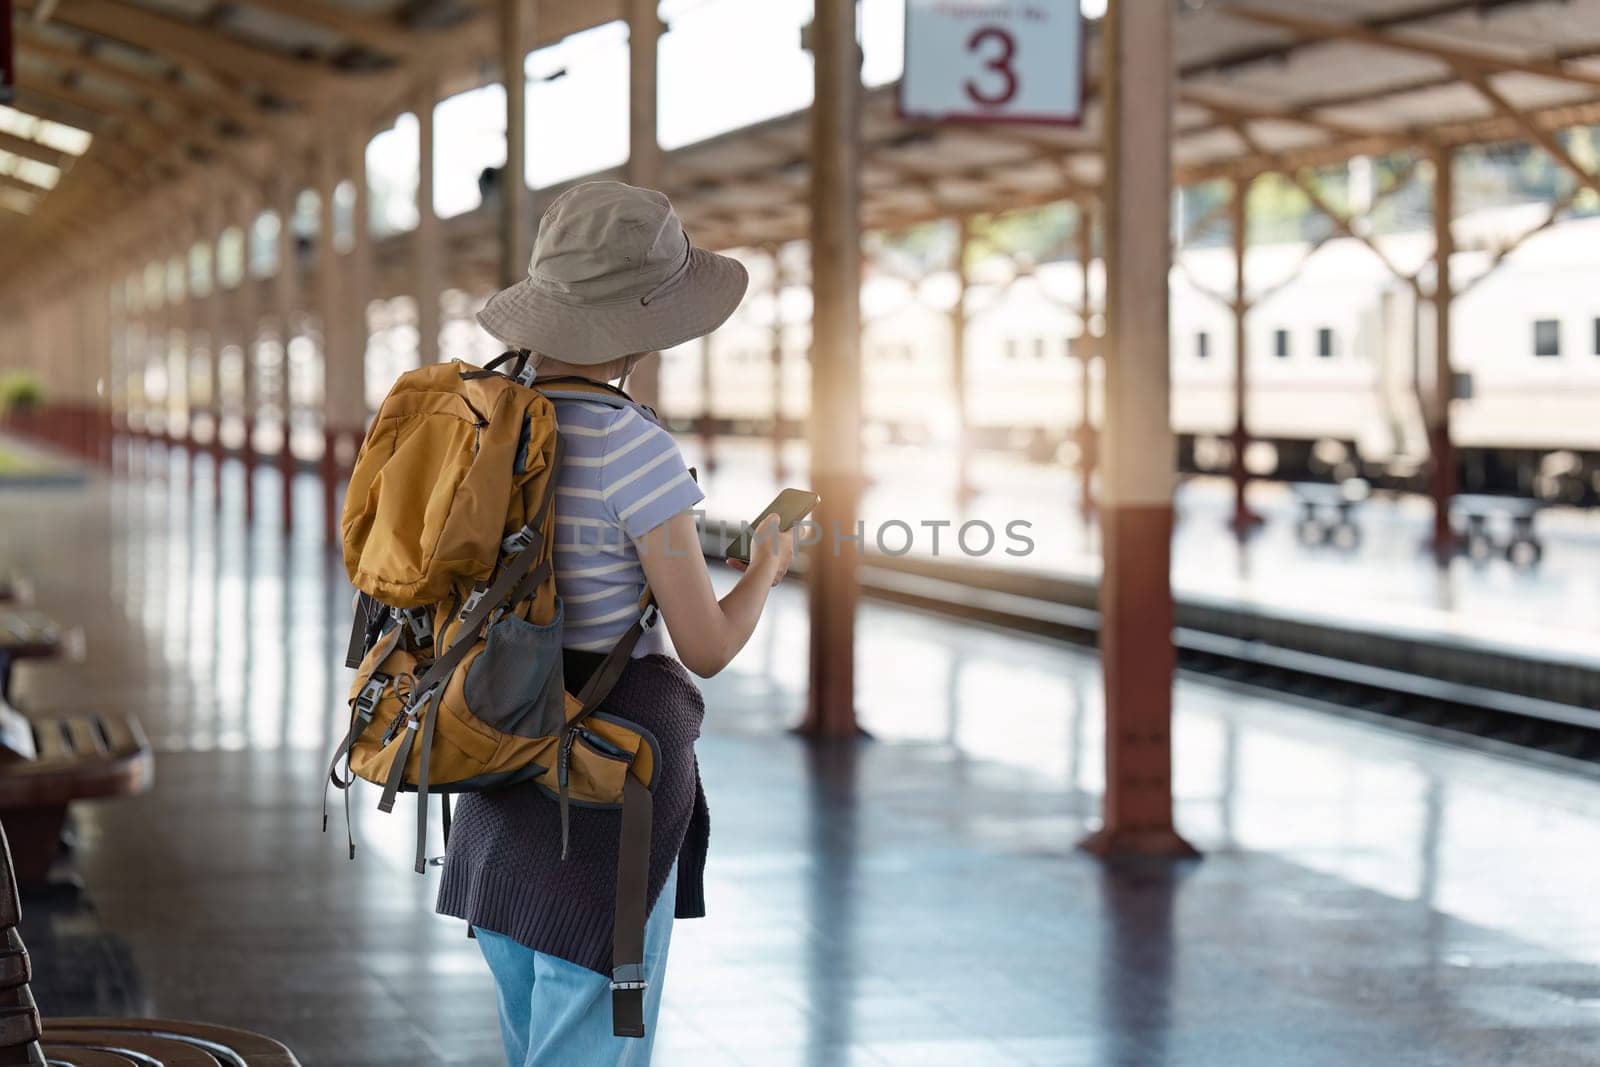 A solo traveler with a backpack and hat stands at a train station platform, checking their phone for travel updates. Perfect for themes of adventure, exploration, and travel.